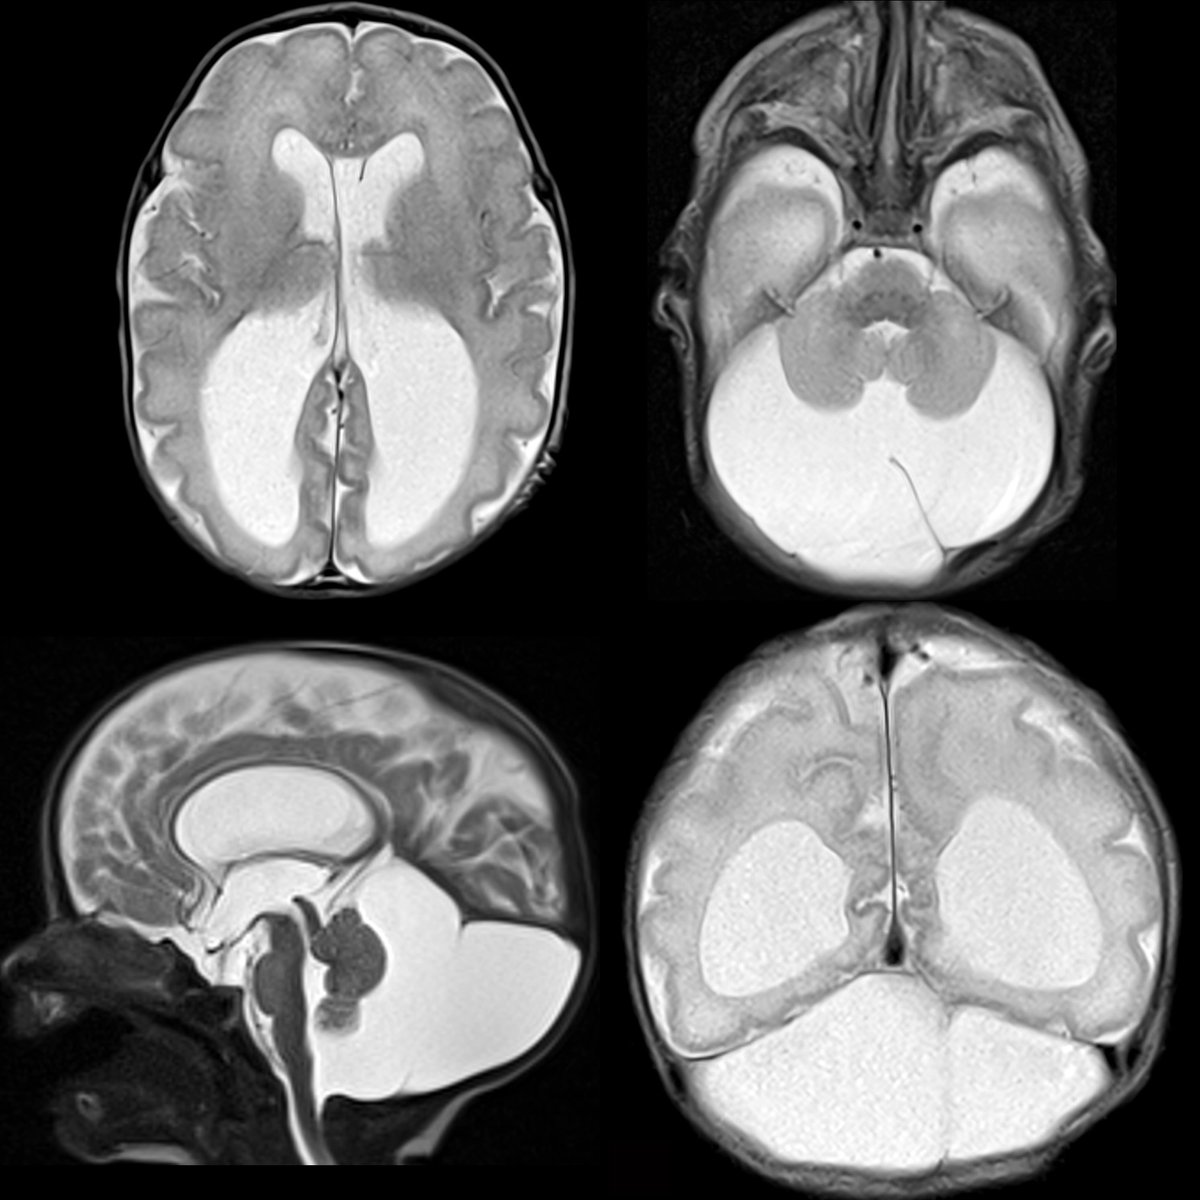 Newborn with hydrocephalus on prenatal US

Axial(above)+sagittal(below left)+coronal(below right) T2 MRI shows dilation of lateral+third ventricles. Cerebellum is small in size+there is a large+fluid-filled posterior fossa

#FOAMed #MedEd #FOAMPed #FOAMRad #PedsRad #RadEd #RadRes